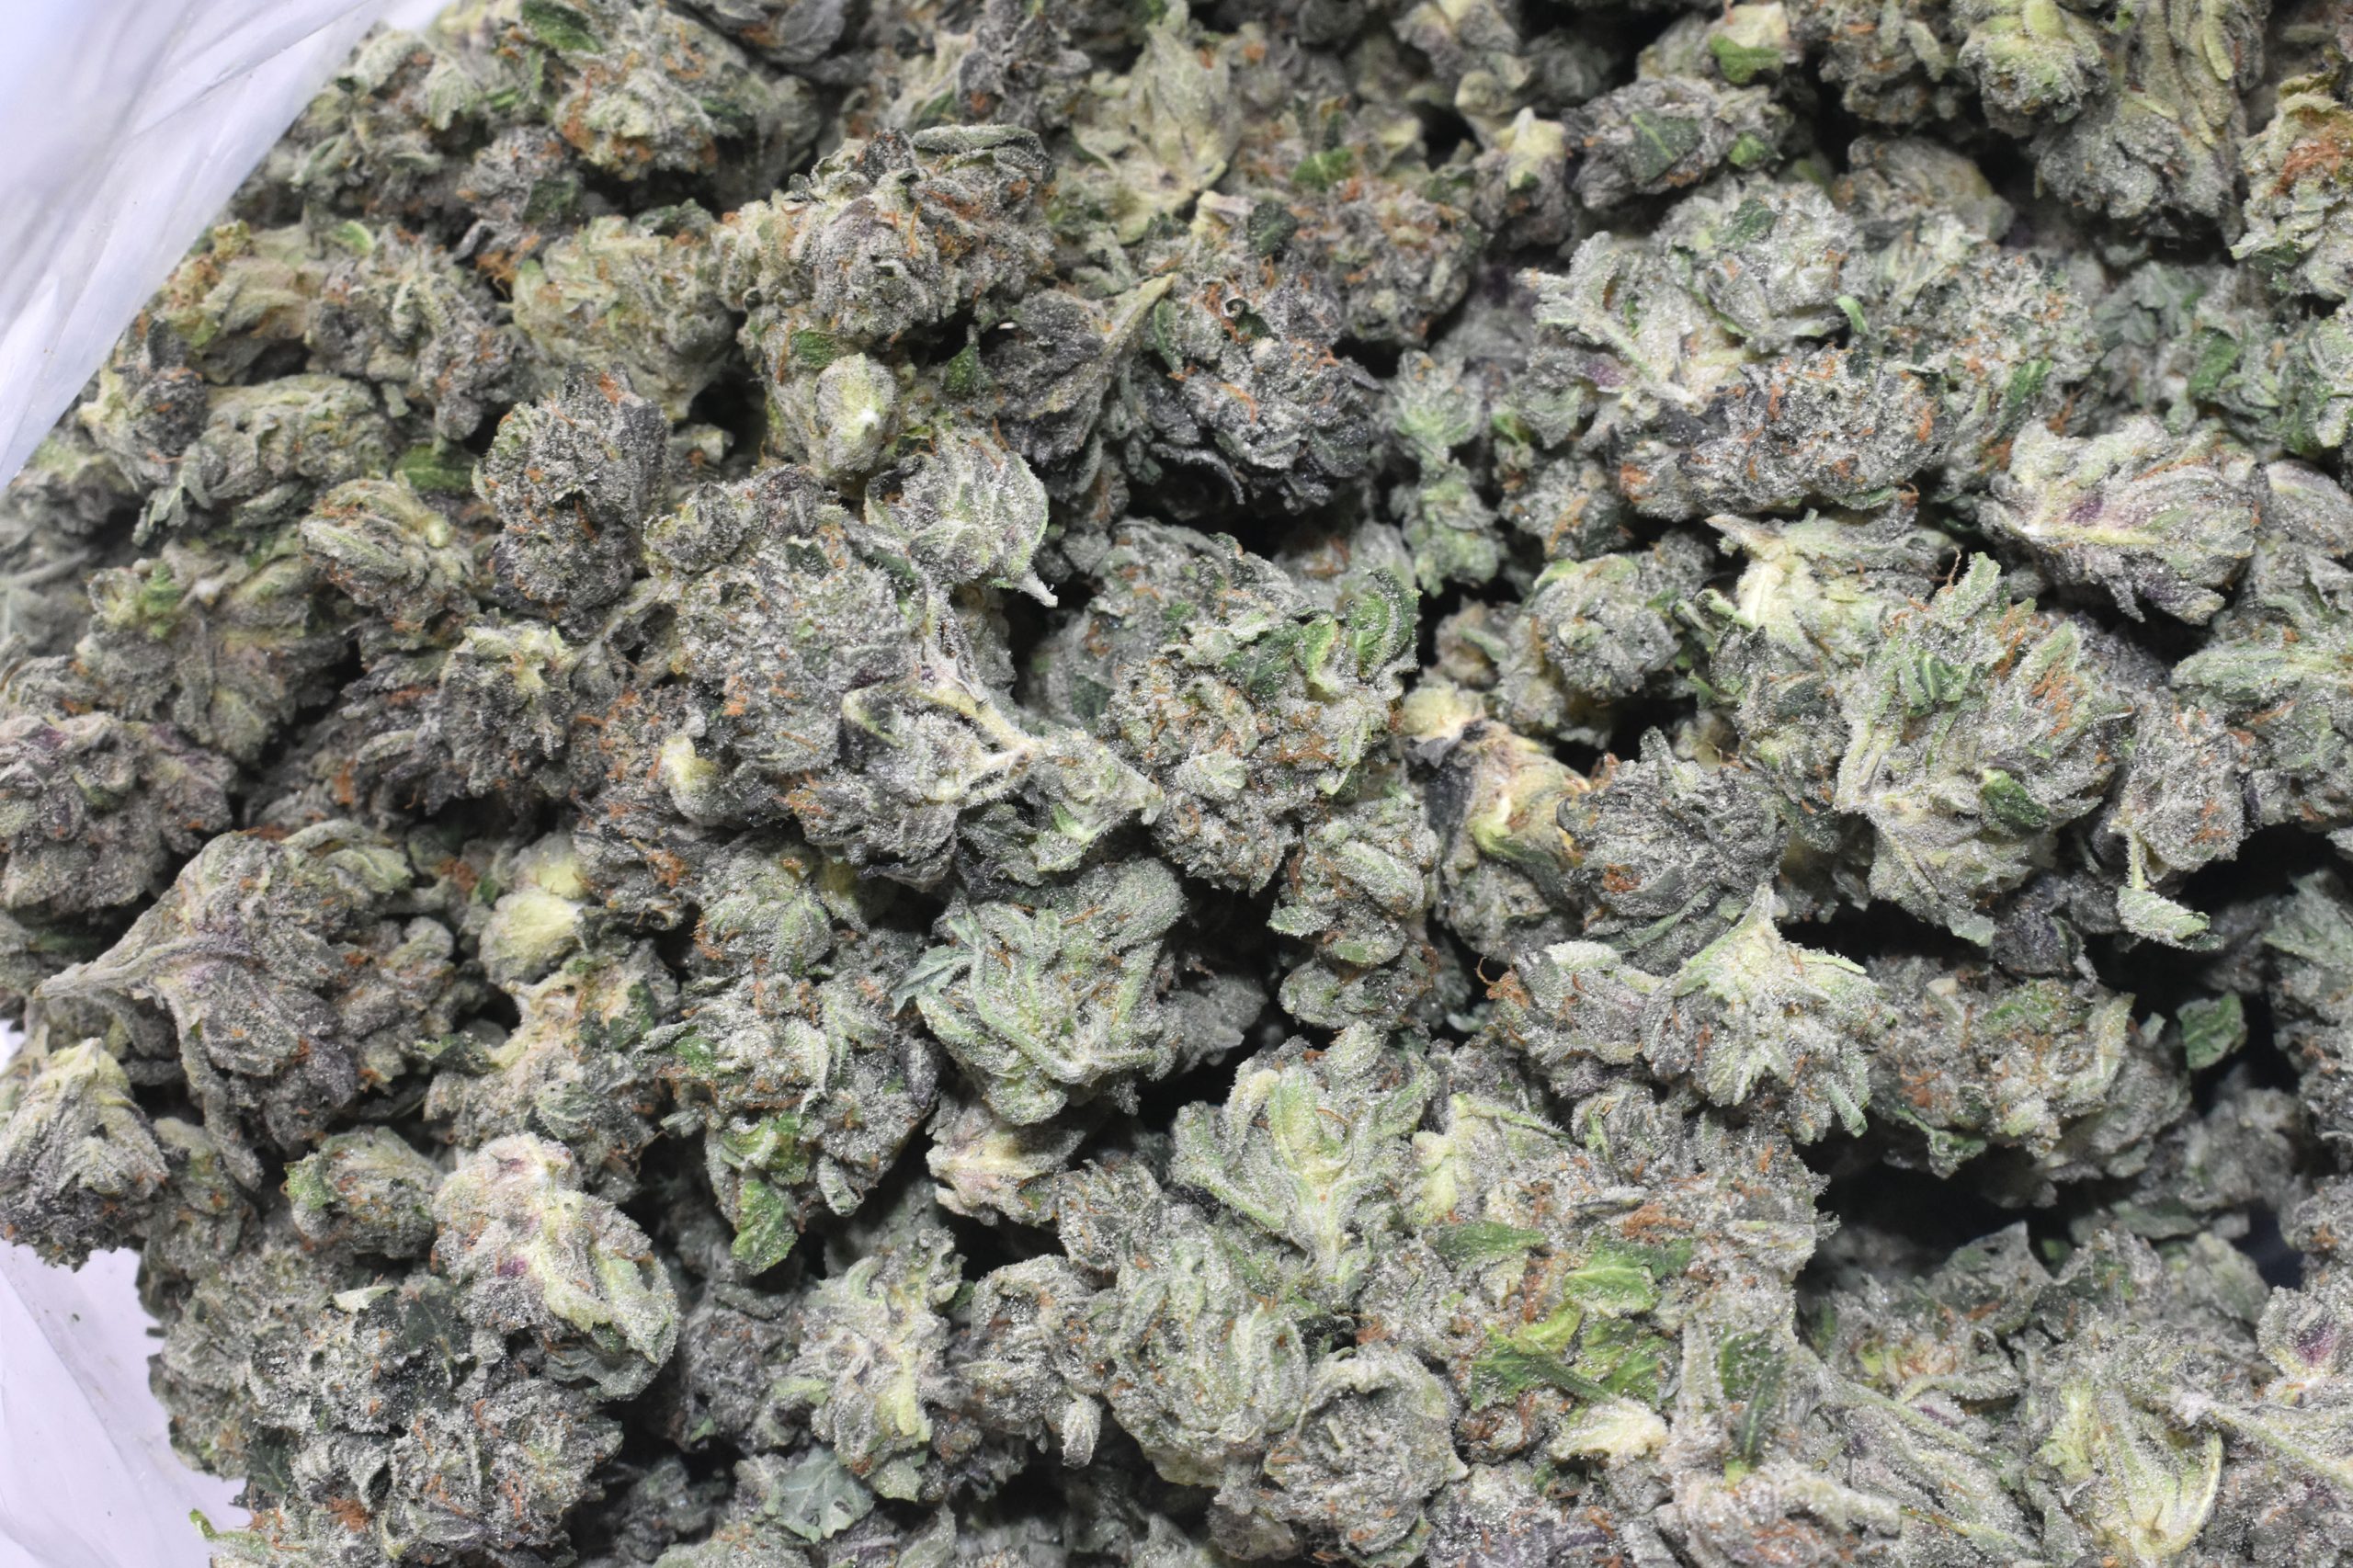 buy-purple-sunset-popcorn-online-at-chronicfarms.cc-online-weed-dispensary